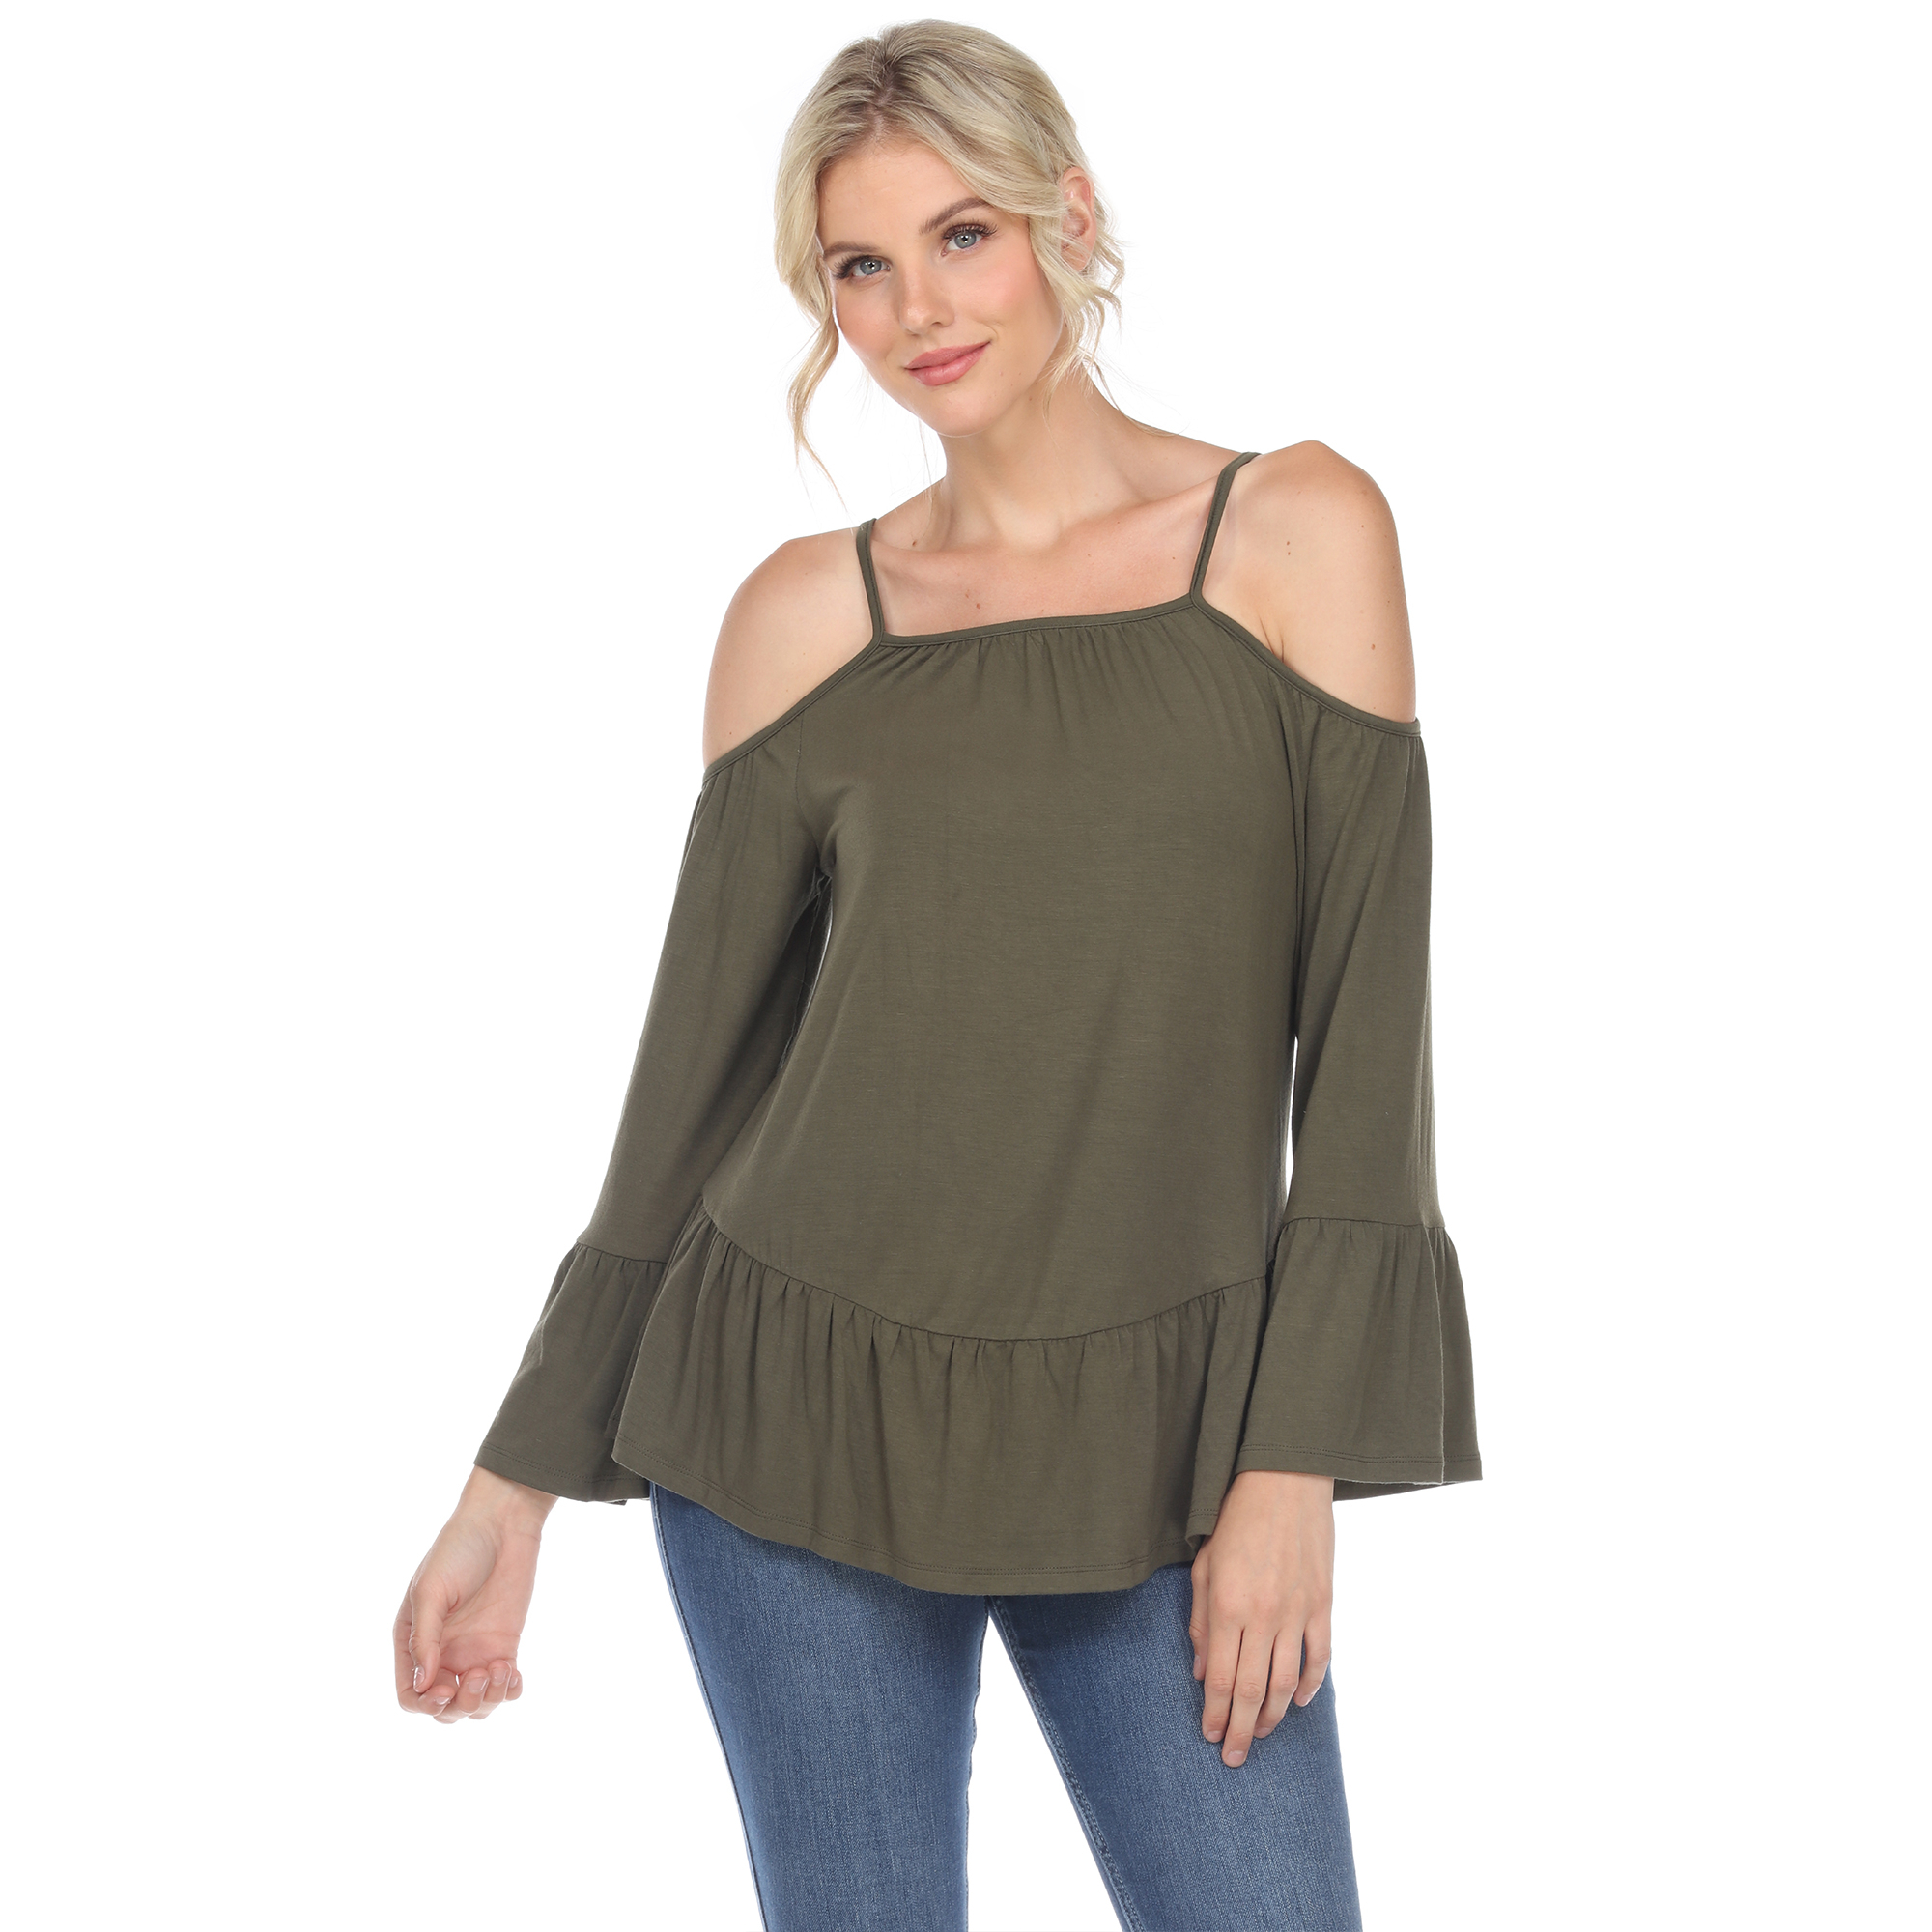 White Mark Women's Cold Shoulder Ruffle Sleeve Top - Olive, X-Large